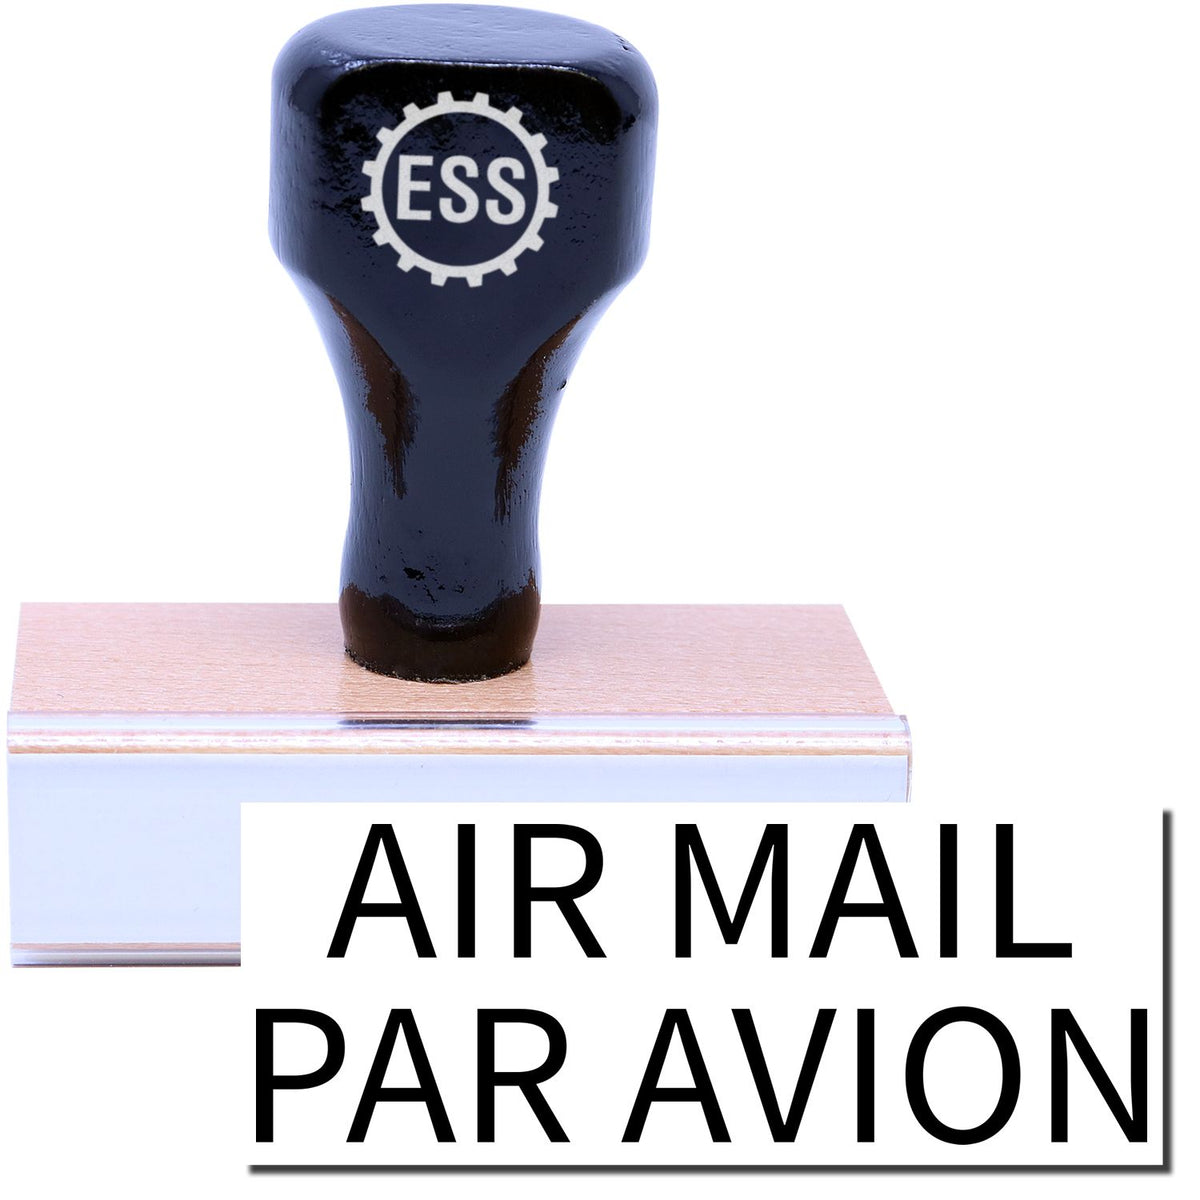 A stock office rubber stamp with a stamped image showing how the text &quot;AIR MAIL PAR AVION&quot; in a large font is displayed after stamping.